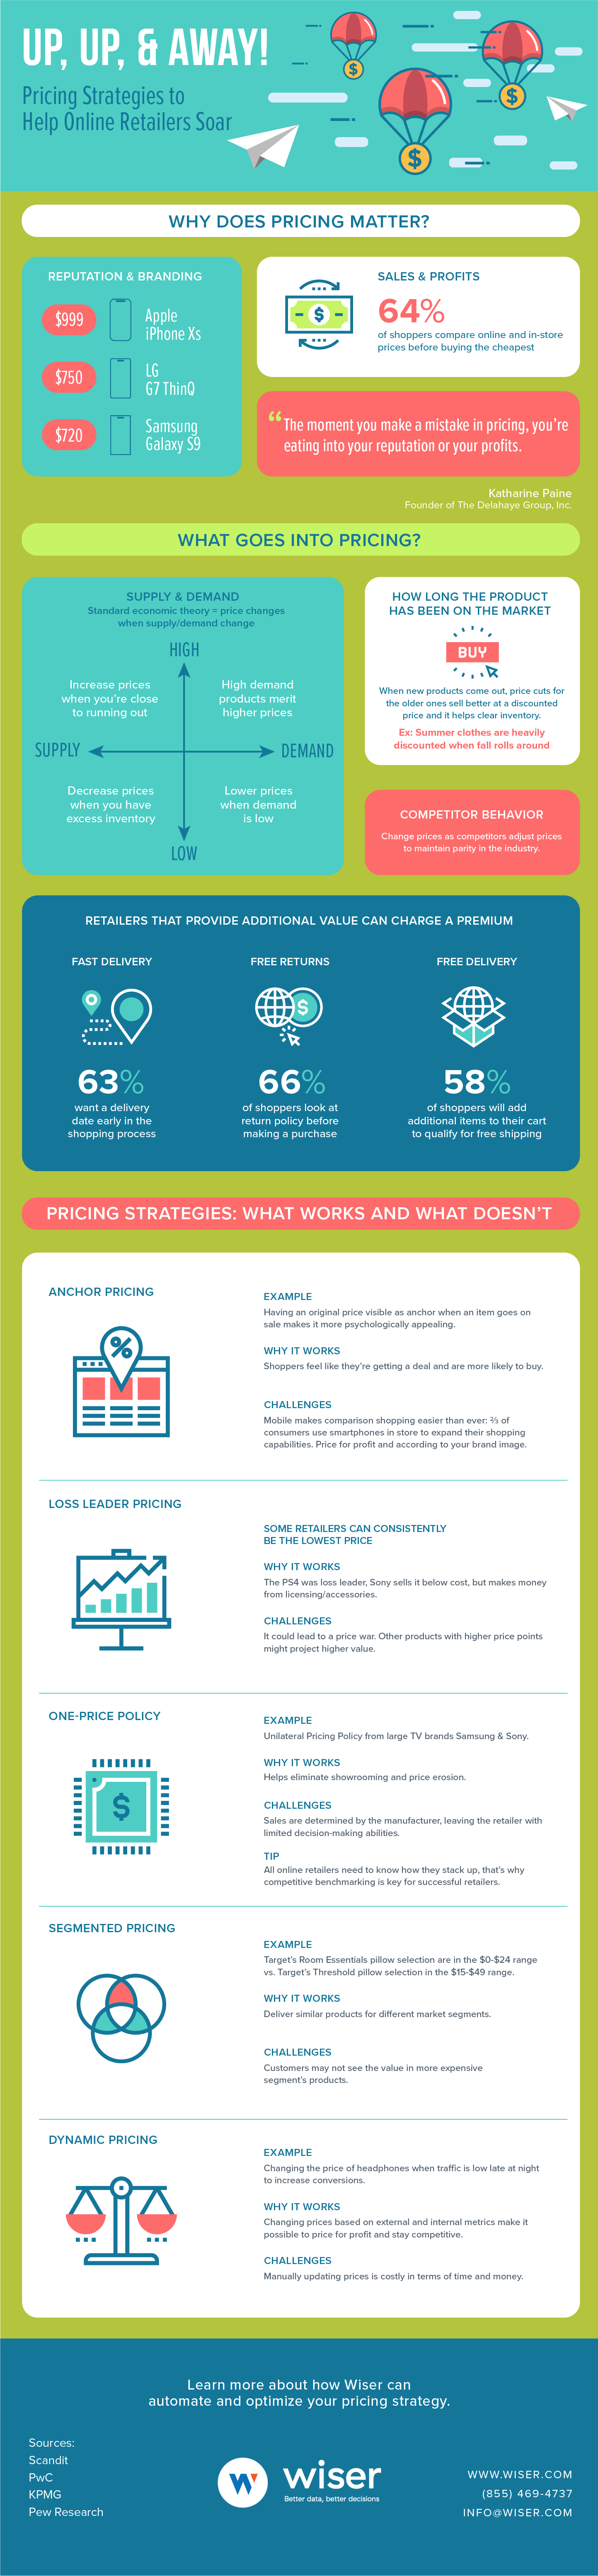 Pricing Strategies for Online Retailers Infographic